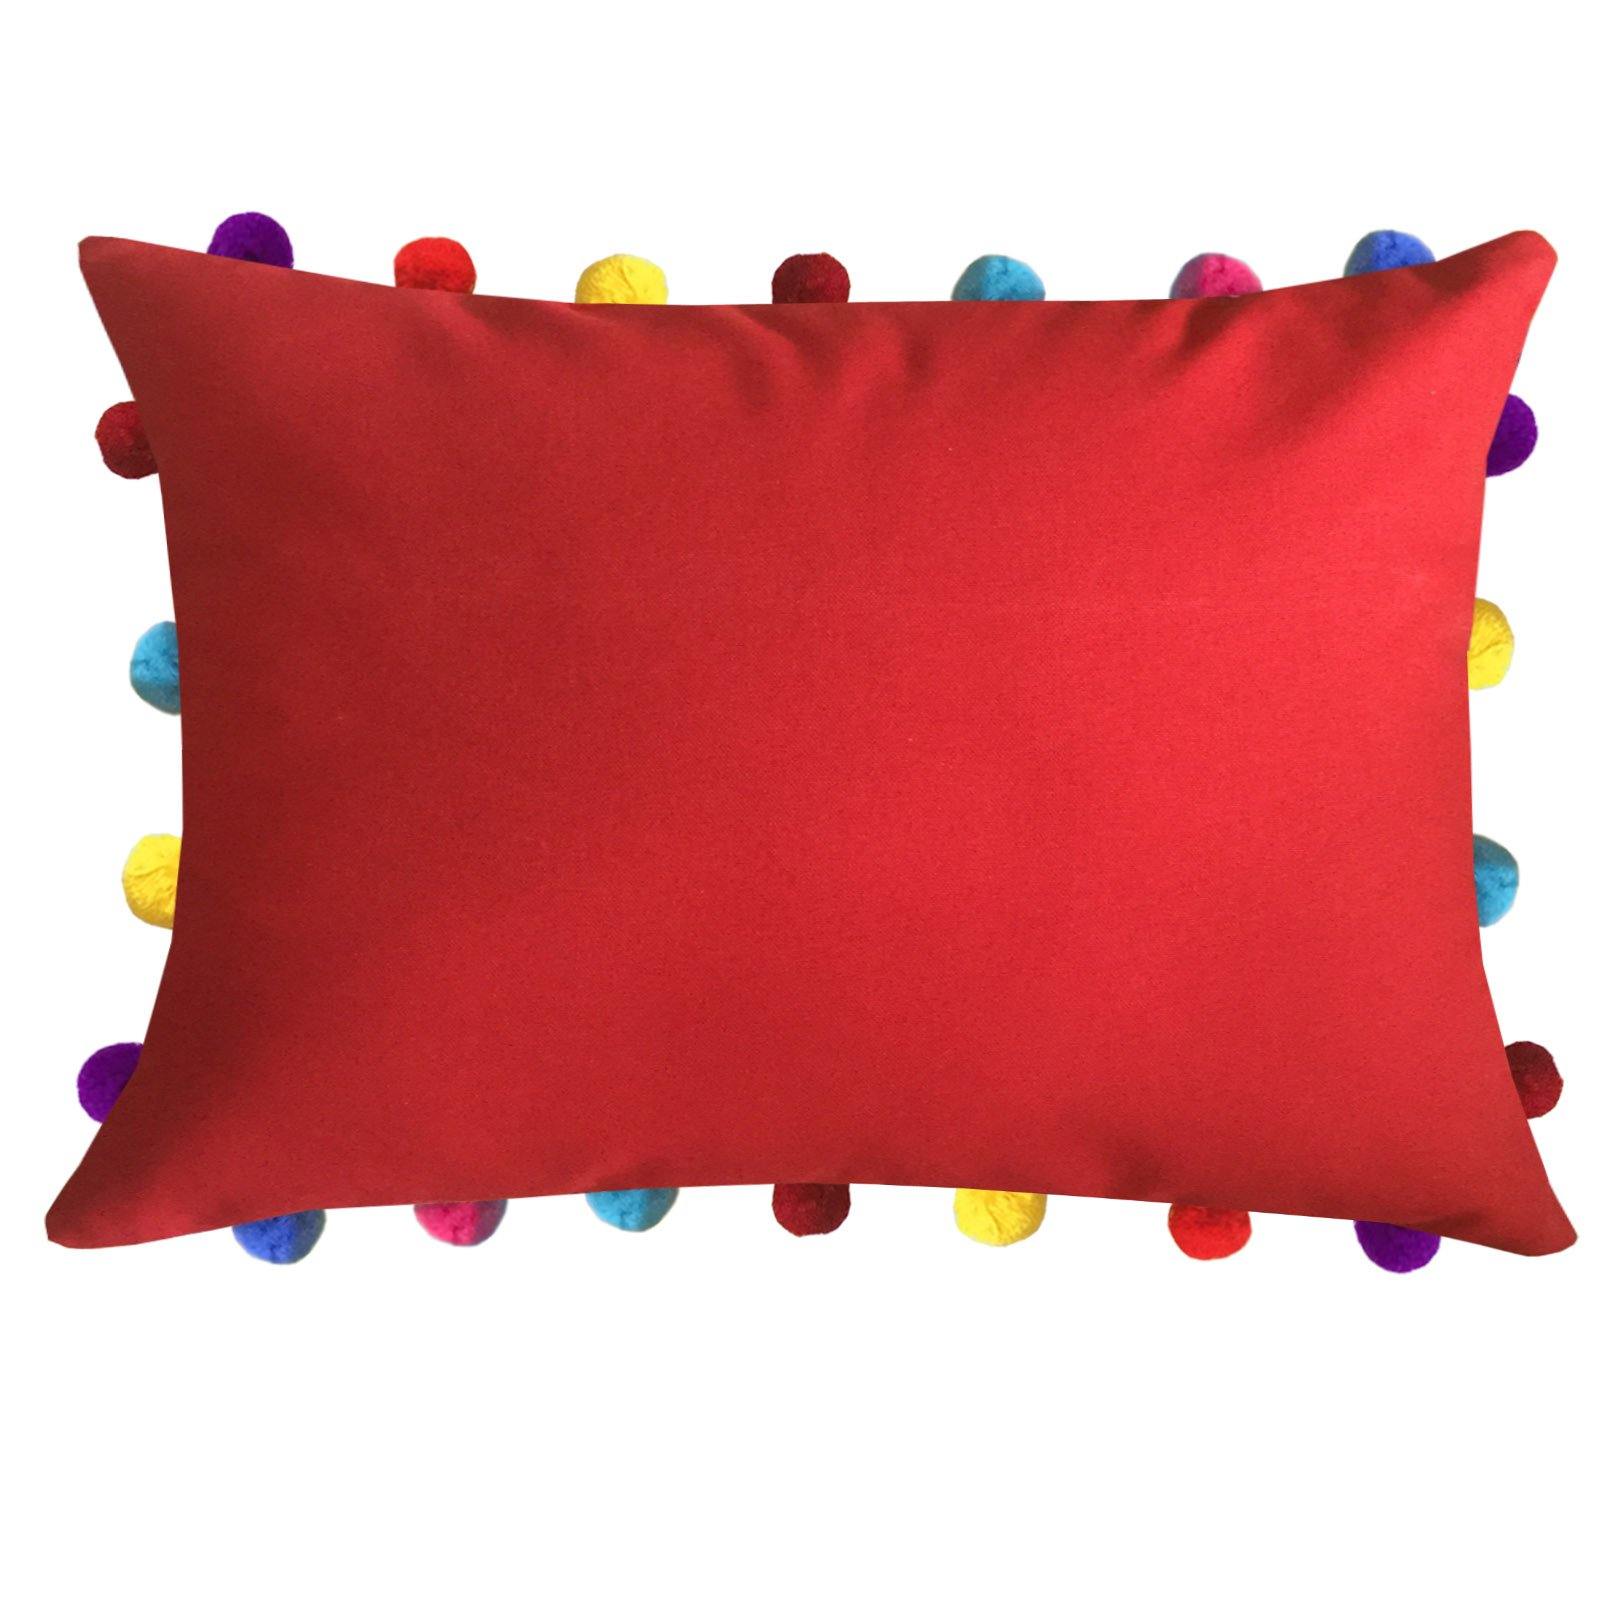 Lushomes Tomato Cushion Cover with Colorful Pom poms (Single pc, 14 x 20”) - Lushomes